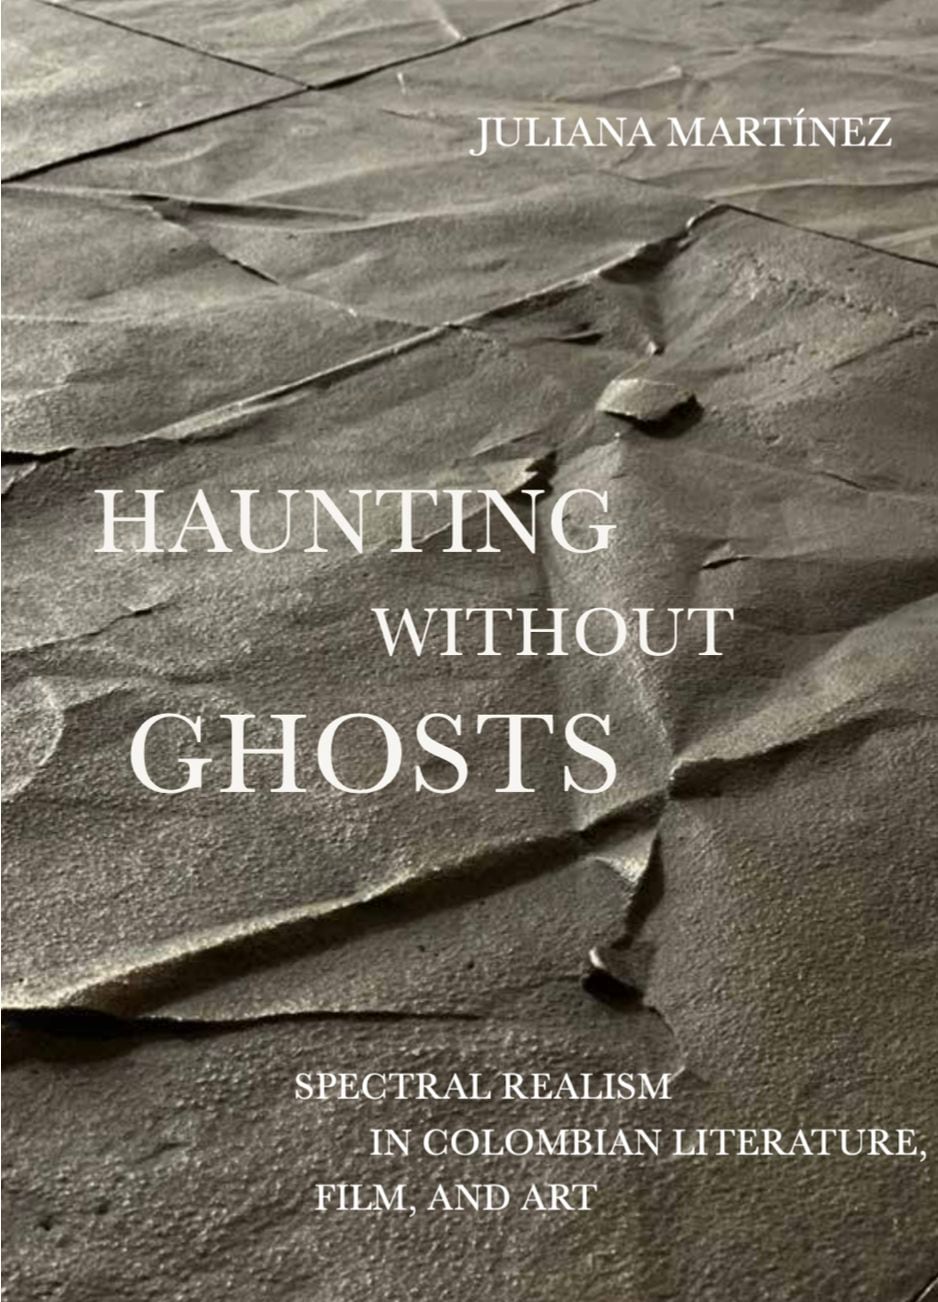 Juliana Martínez - Hunting Without Ghosts